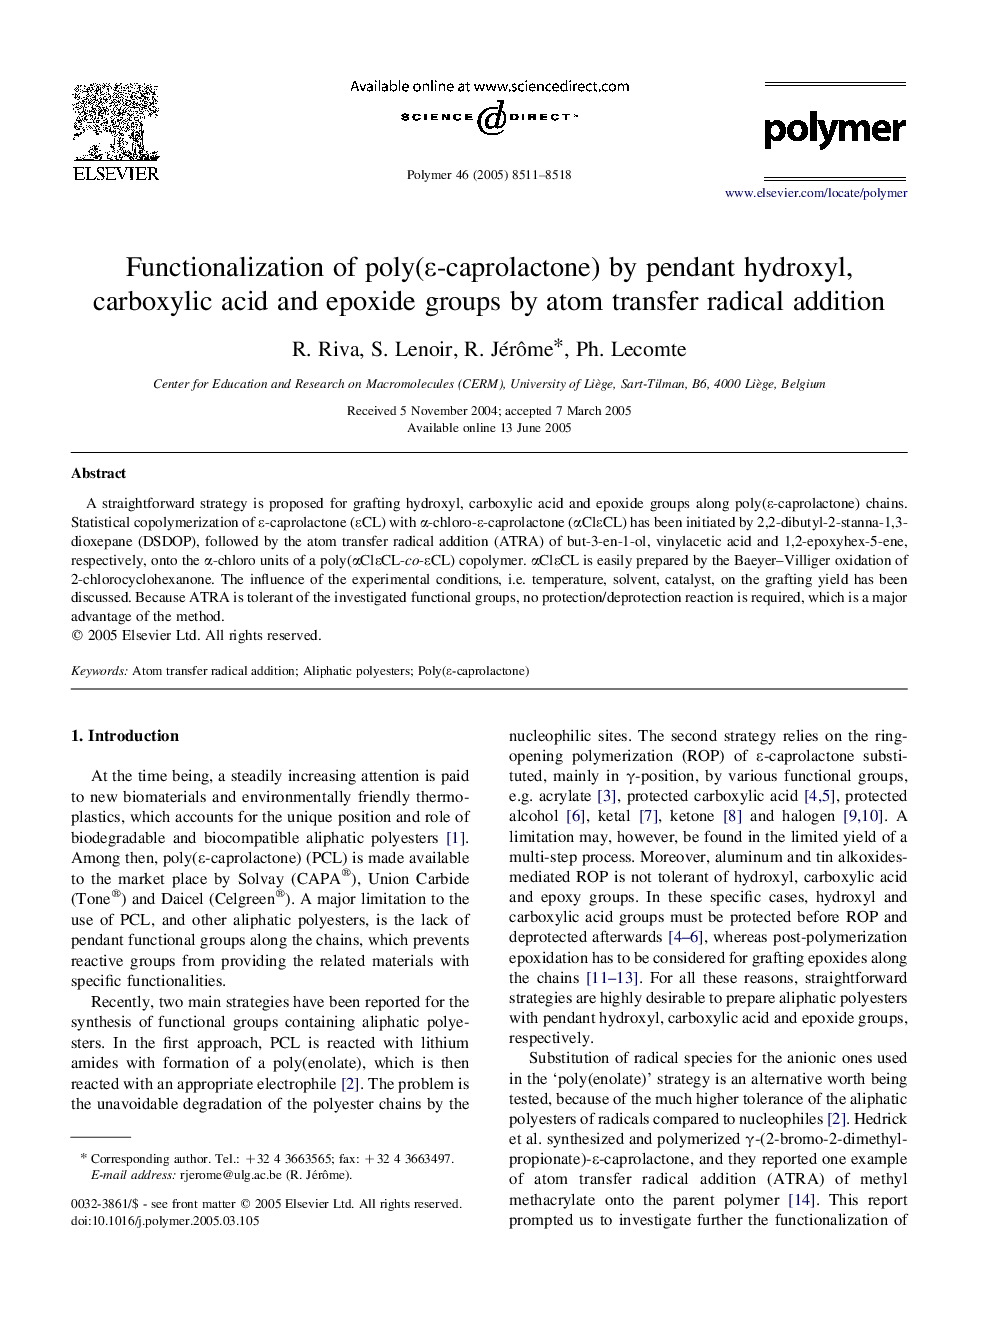 Functionalization of poly(Îµ-caprolactone) by pendant hydroxyl, carboxylic acid and epoxide groups by atom transfer radical addition